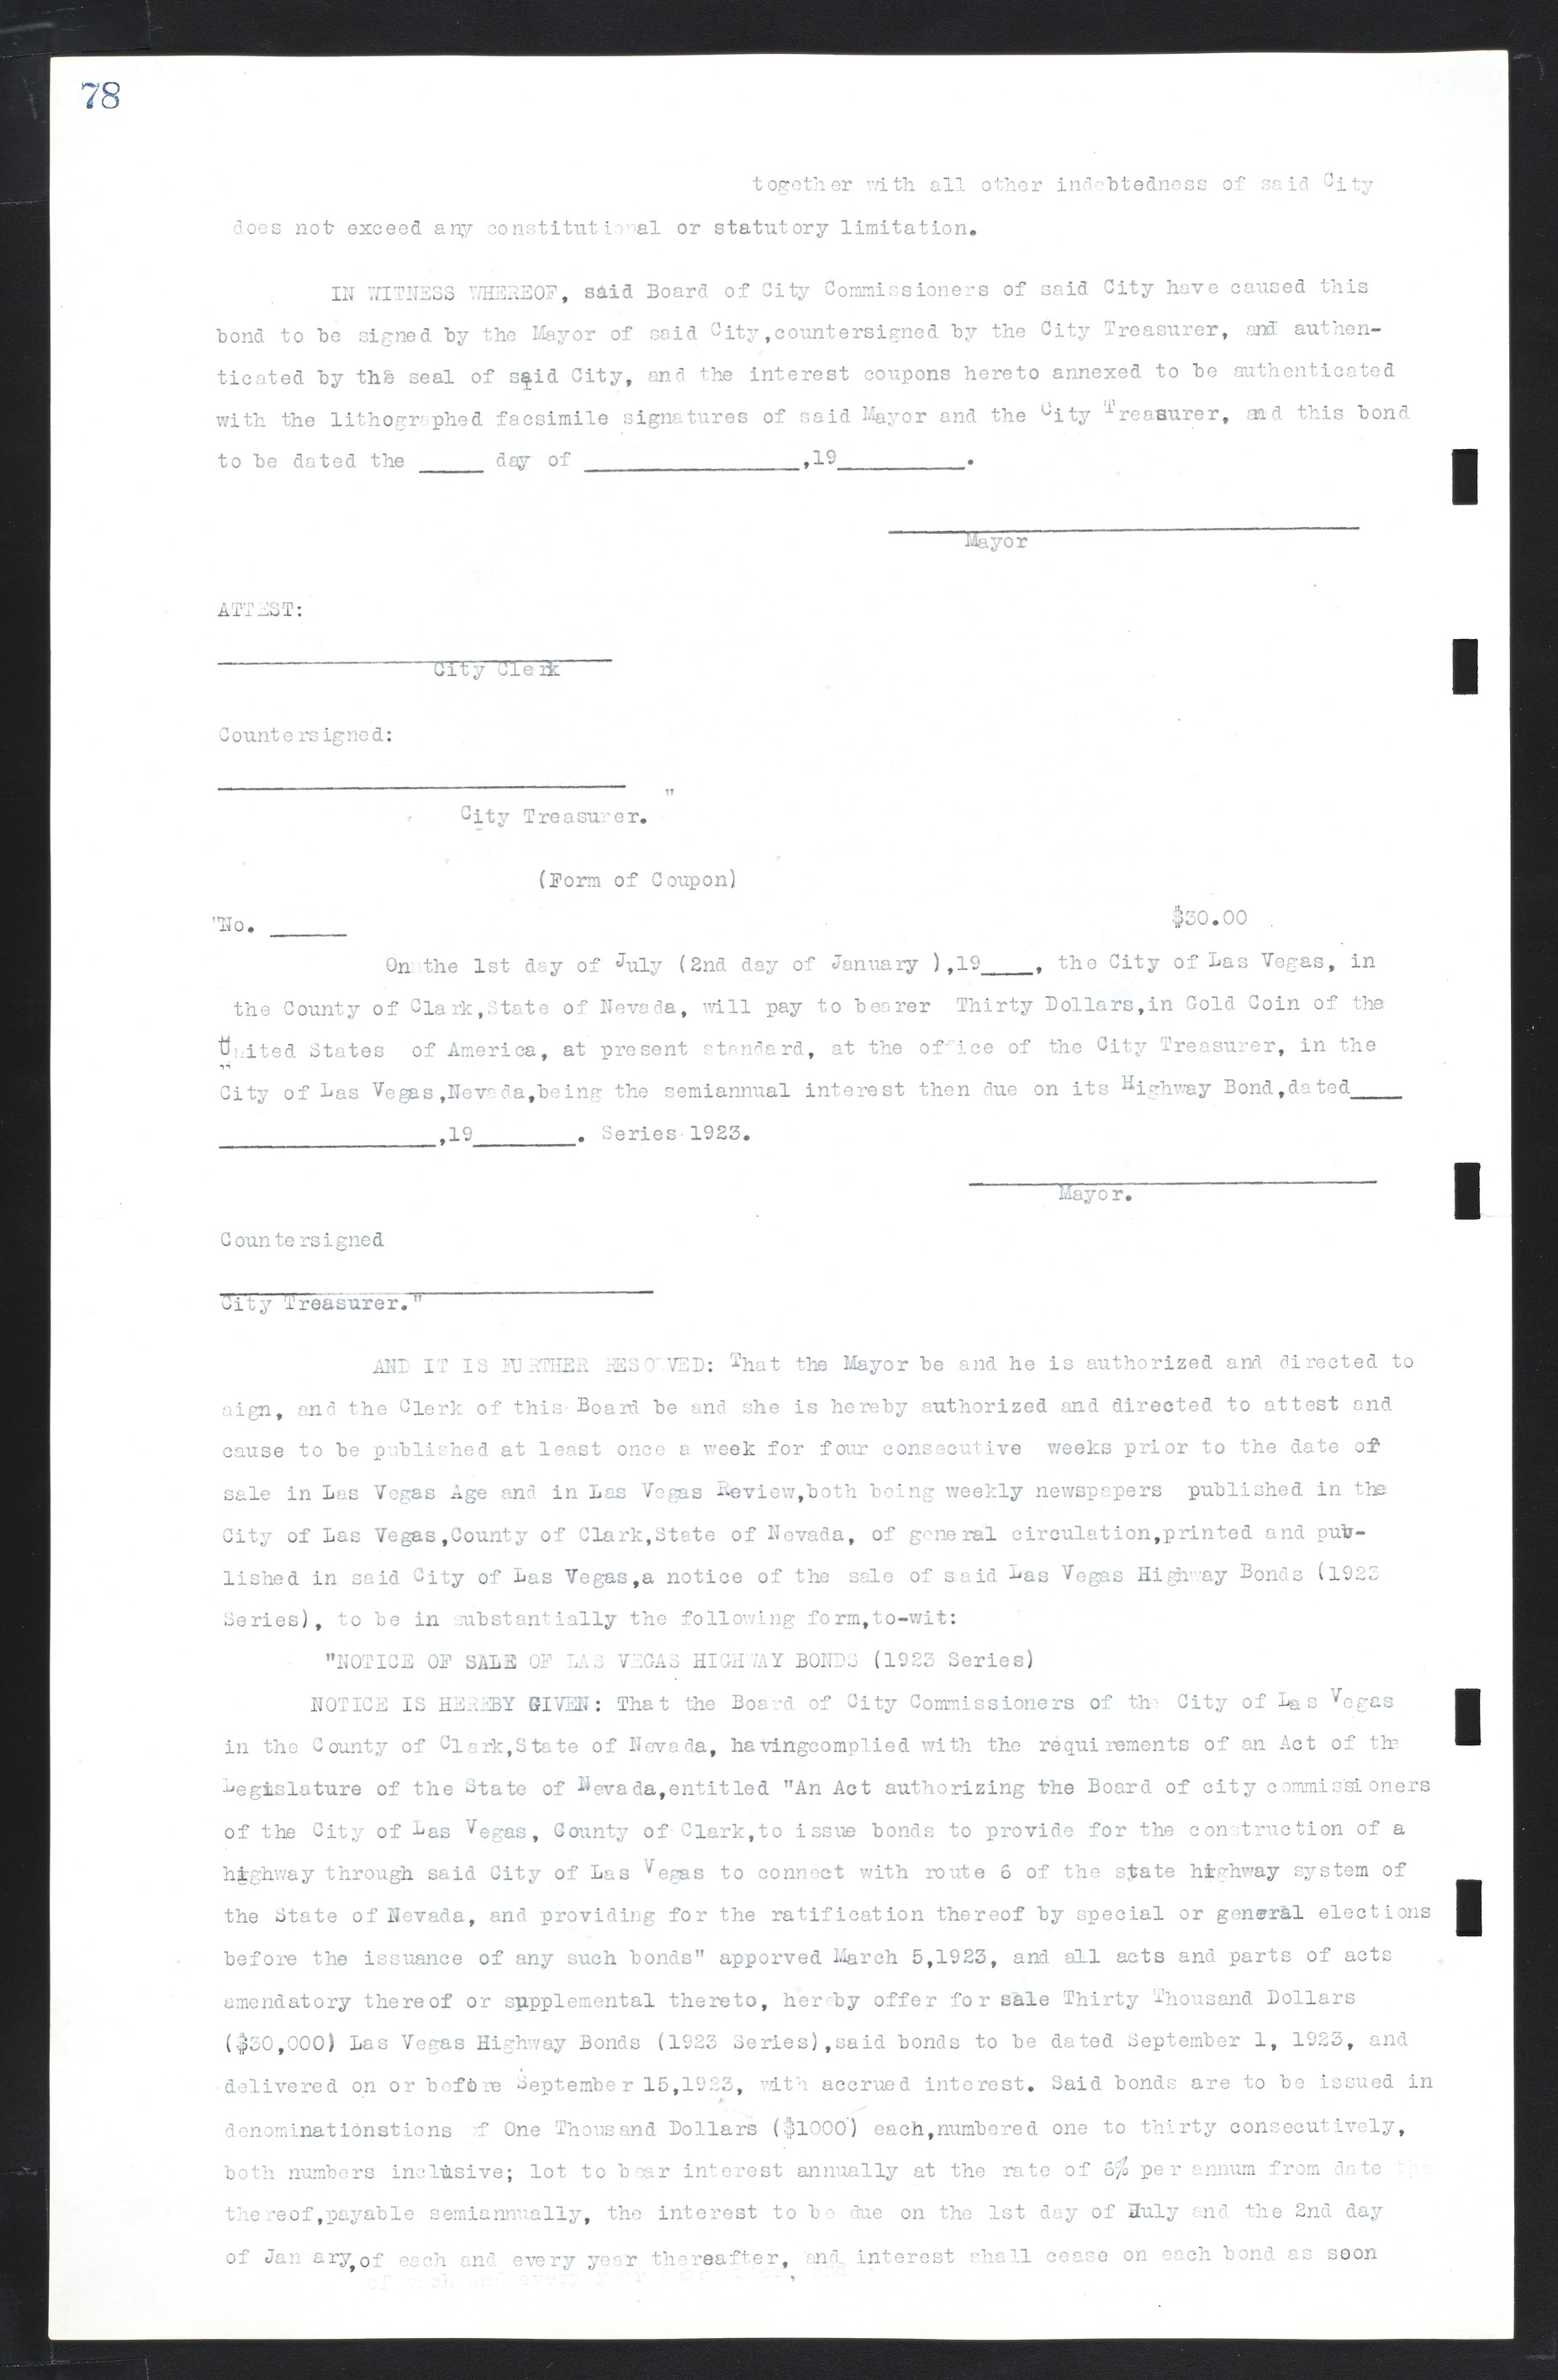 Las Vegas City Commission Minutes, March 1, 1922 to May 10, 1929, lvc000002-85